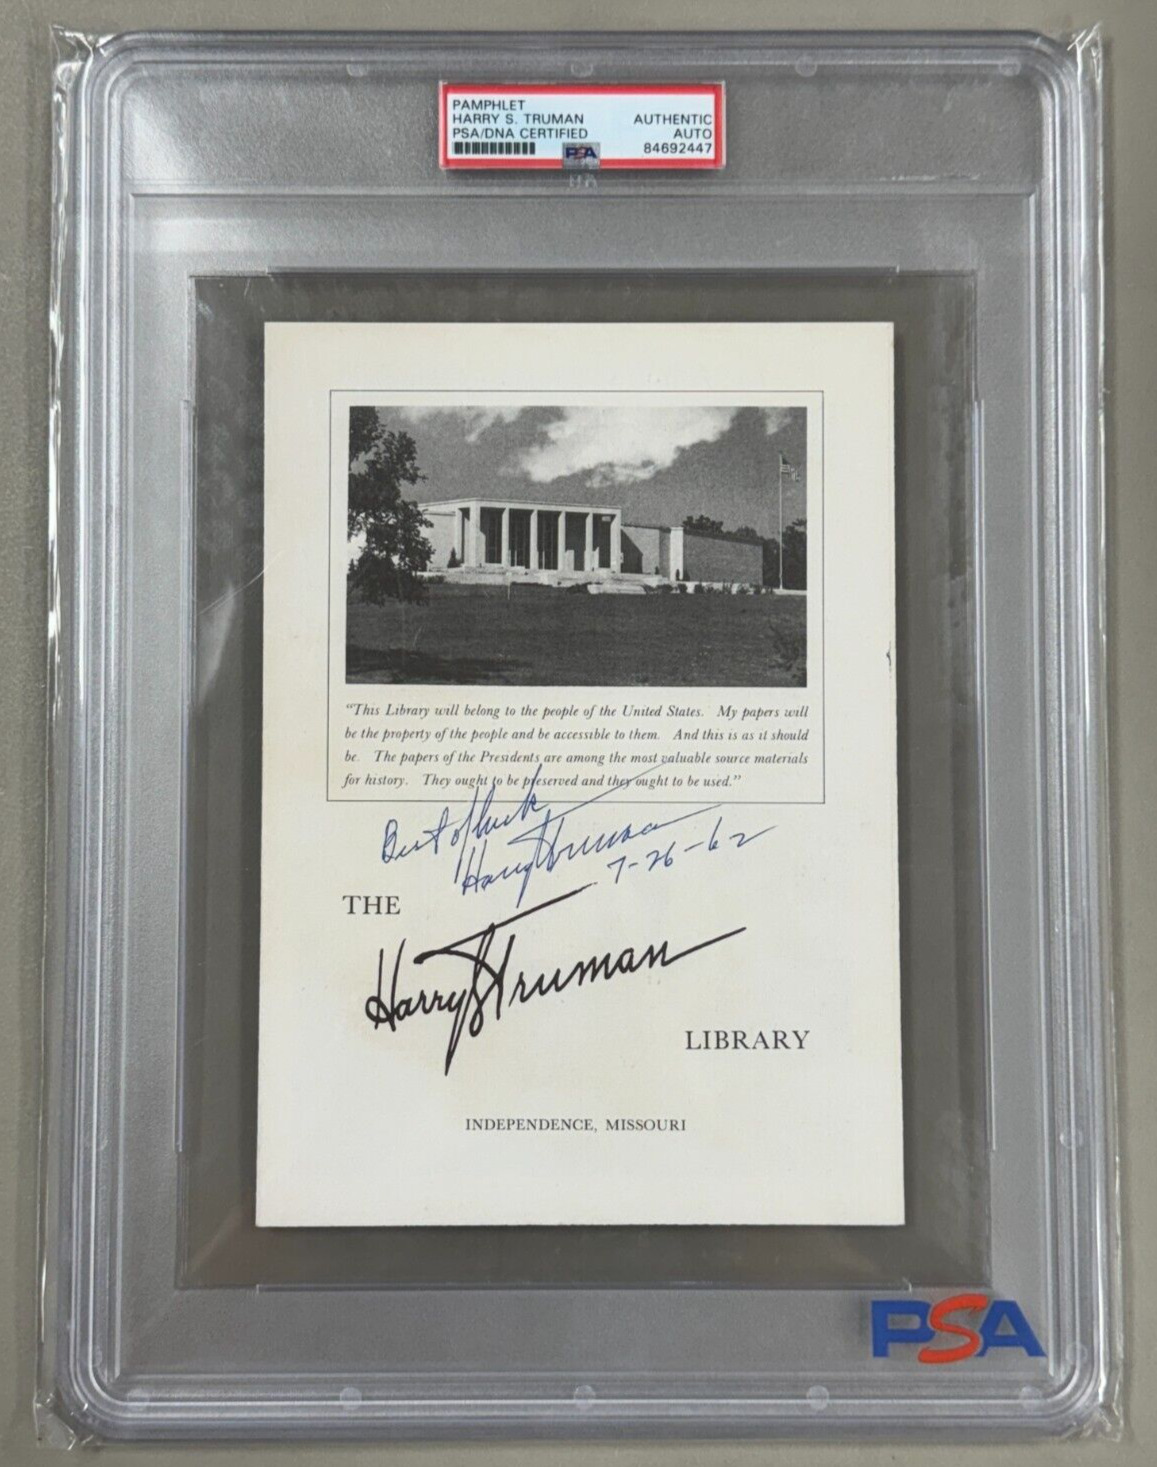 Harry S. Truman Library Pamphlet Signed Encapsulated PSA/DNA Authentic Autograph